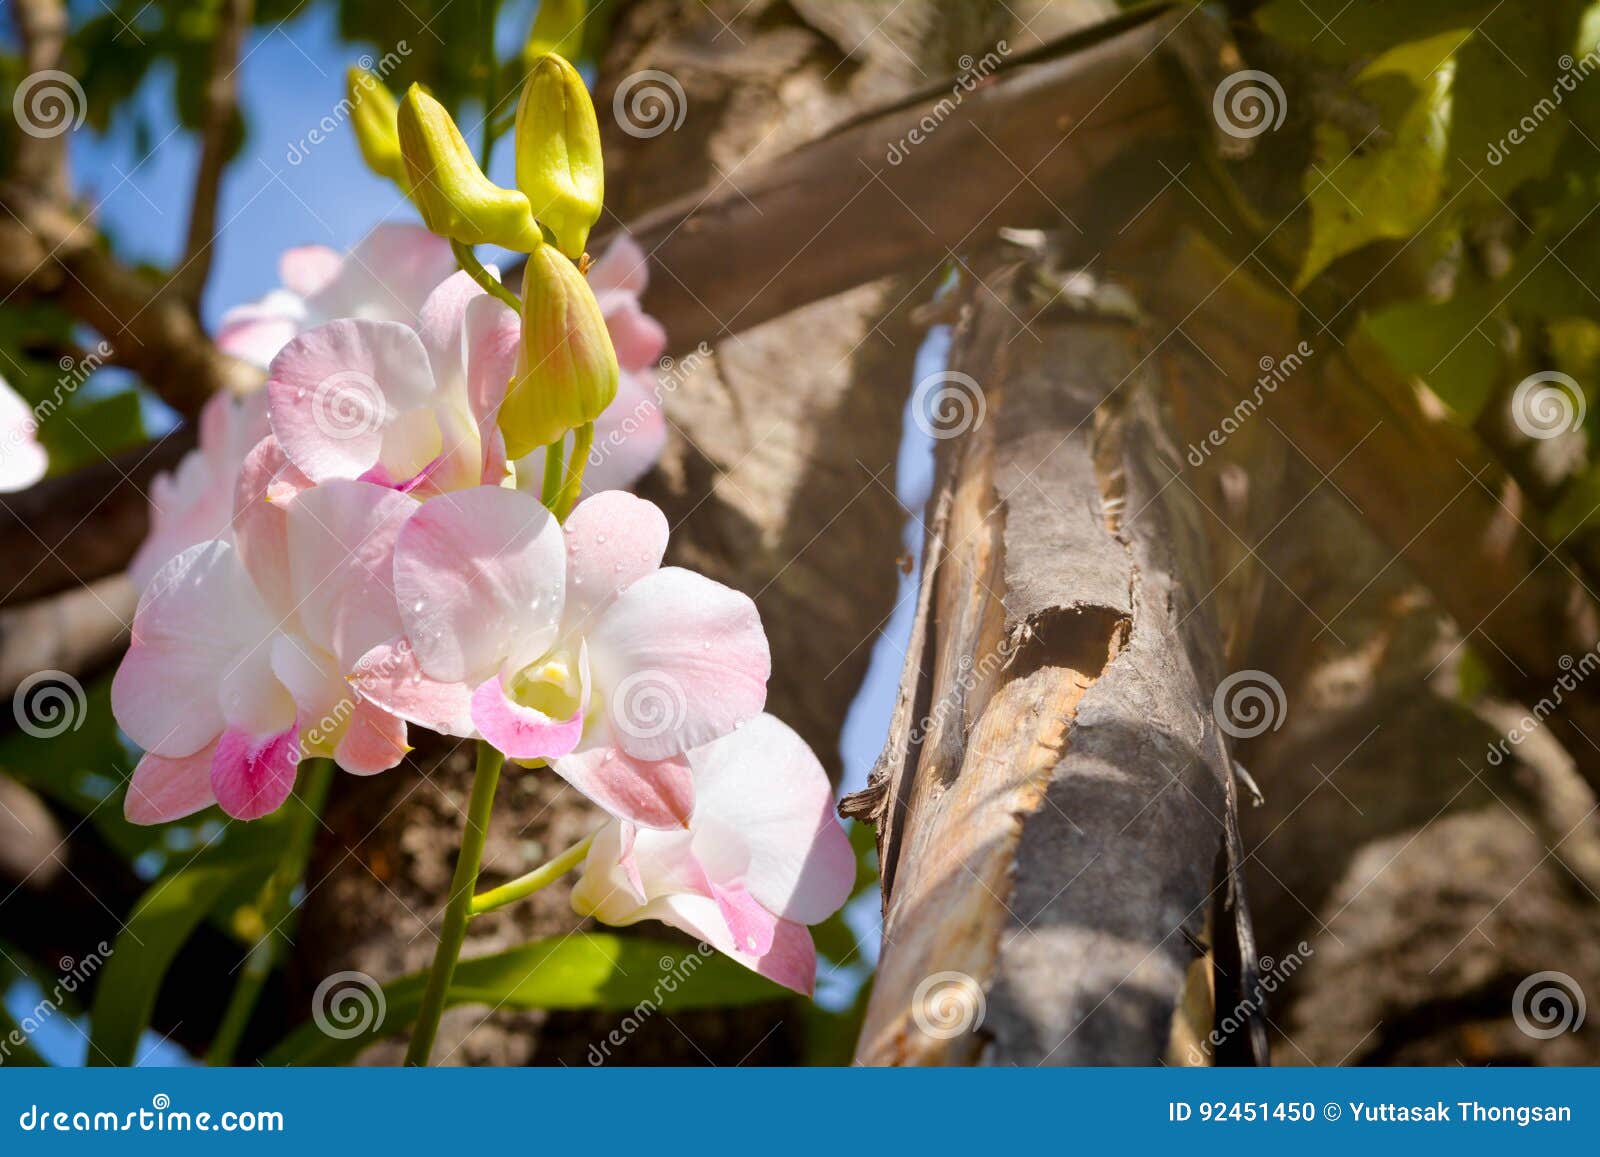 Violet orchid on wallpaper stock photo. Image of pattern - 92451450